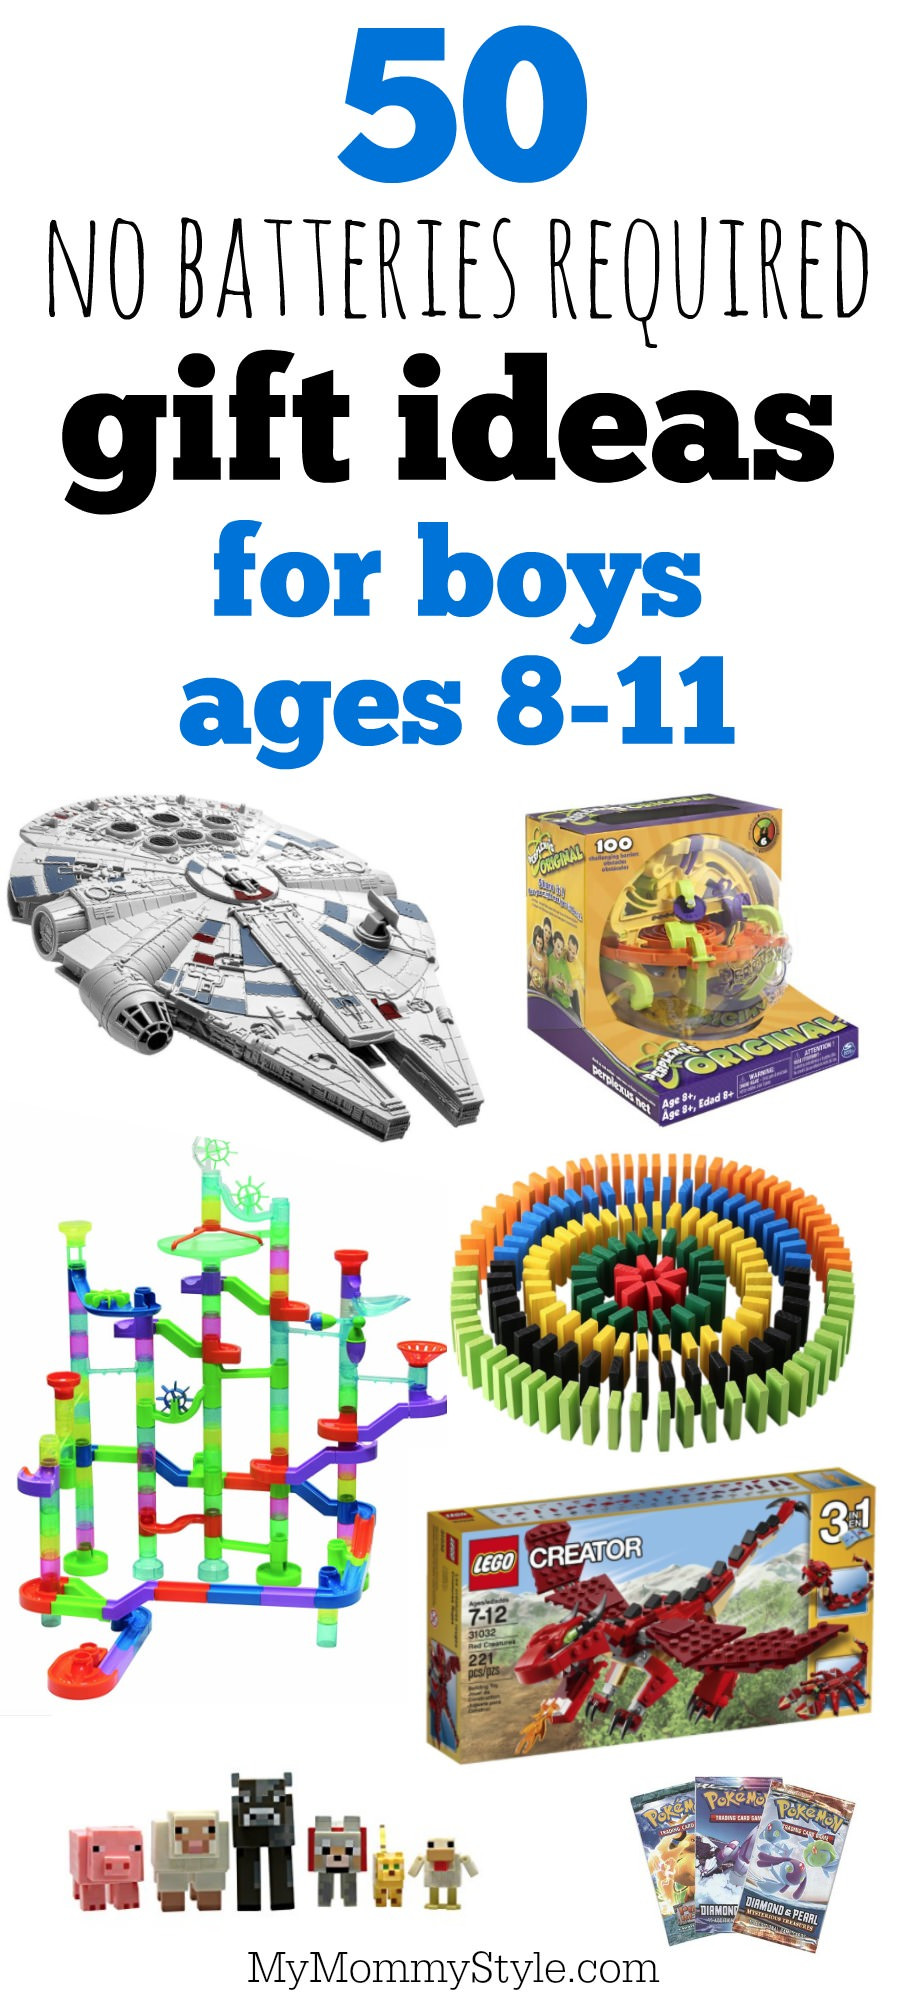 Gift Ideas For Boys Age 11
 50 battery free t ideas for boys ages 8 11 My Mommy Style